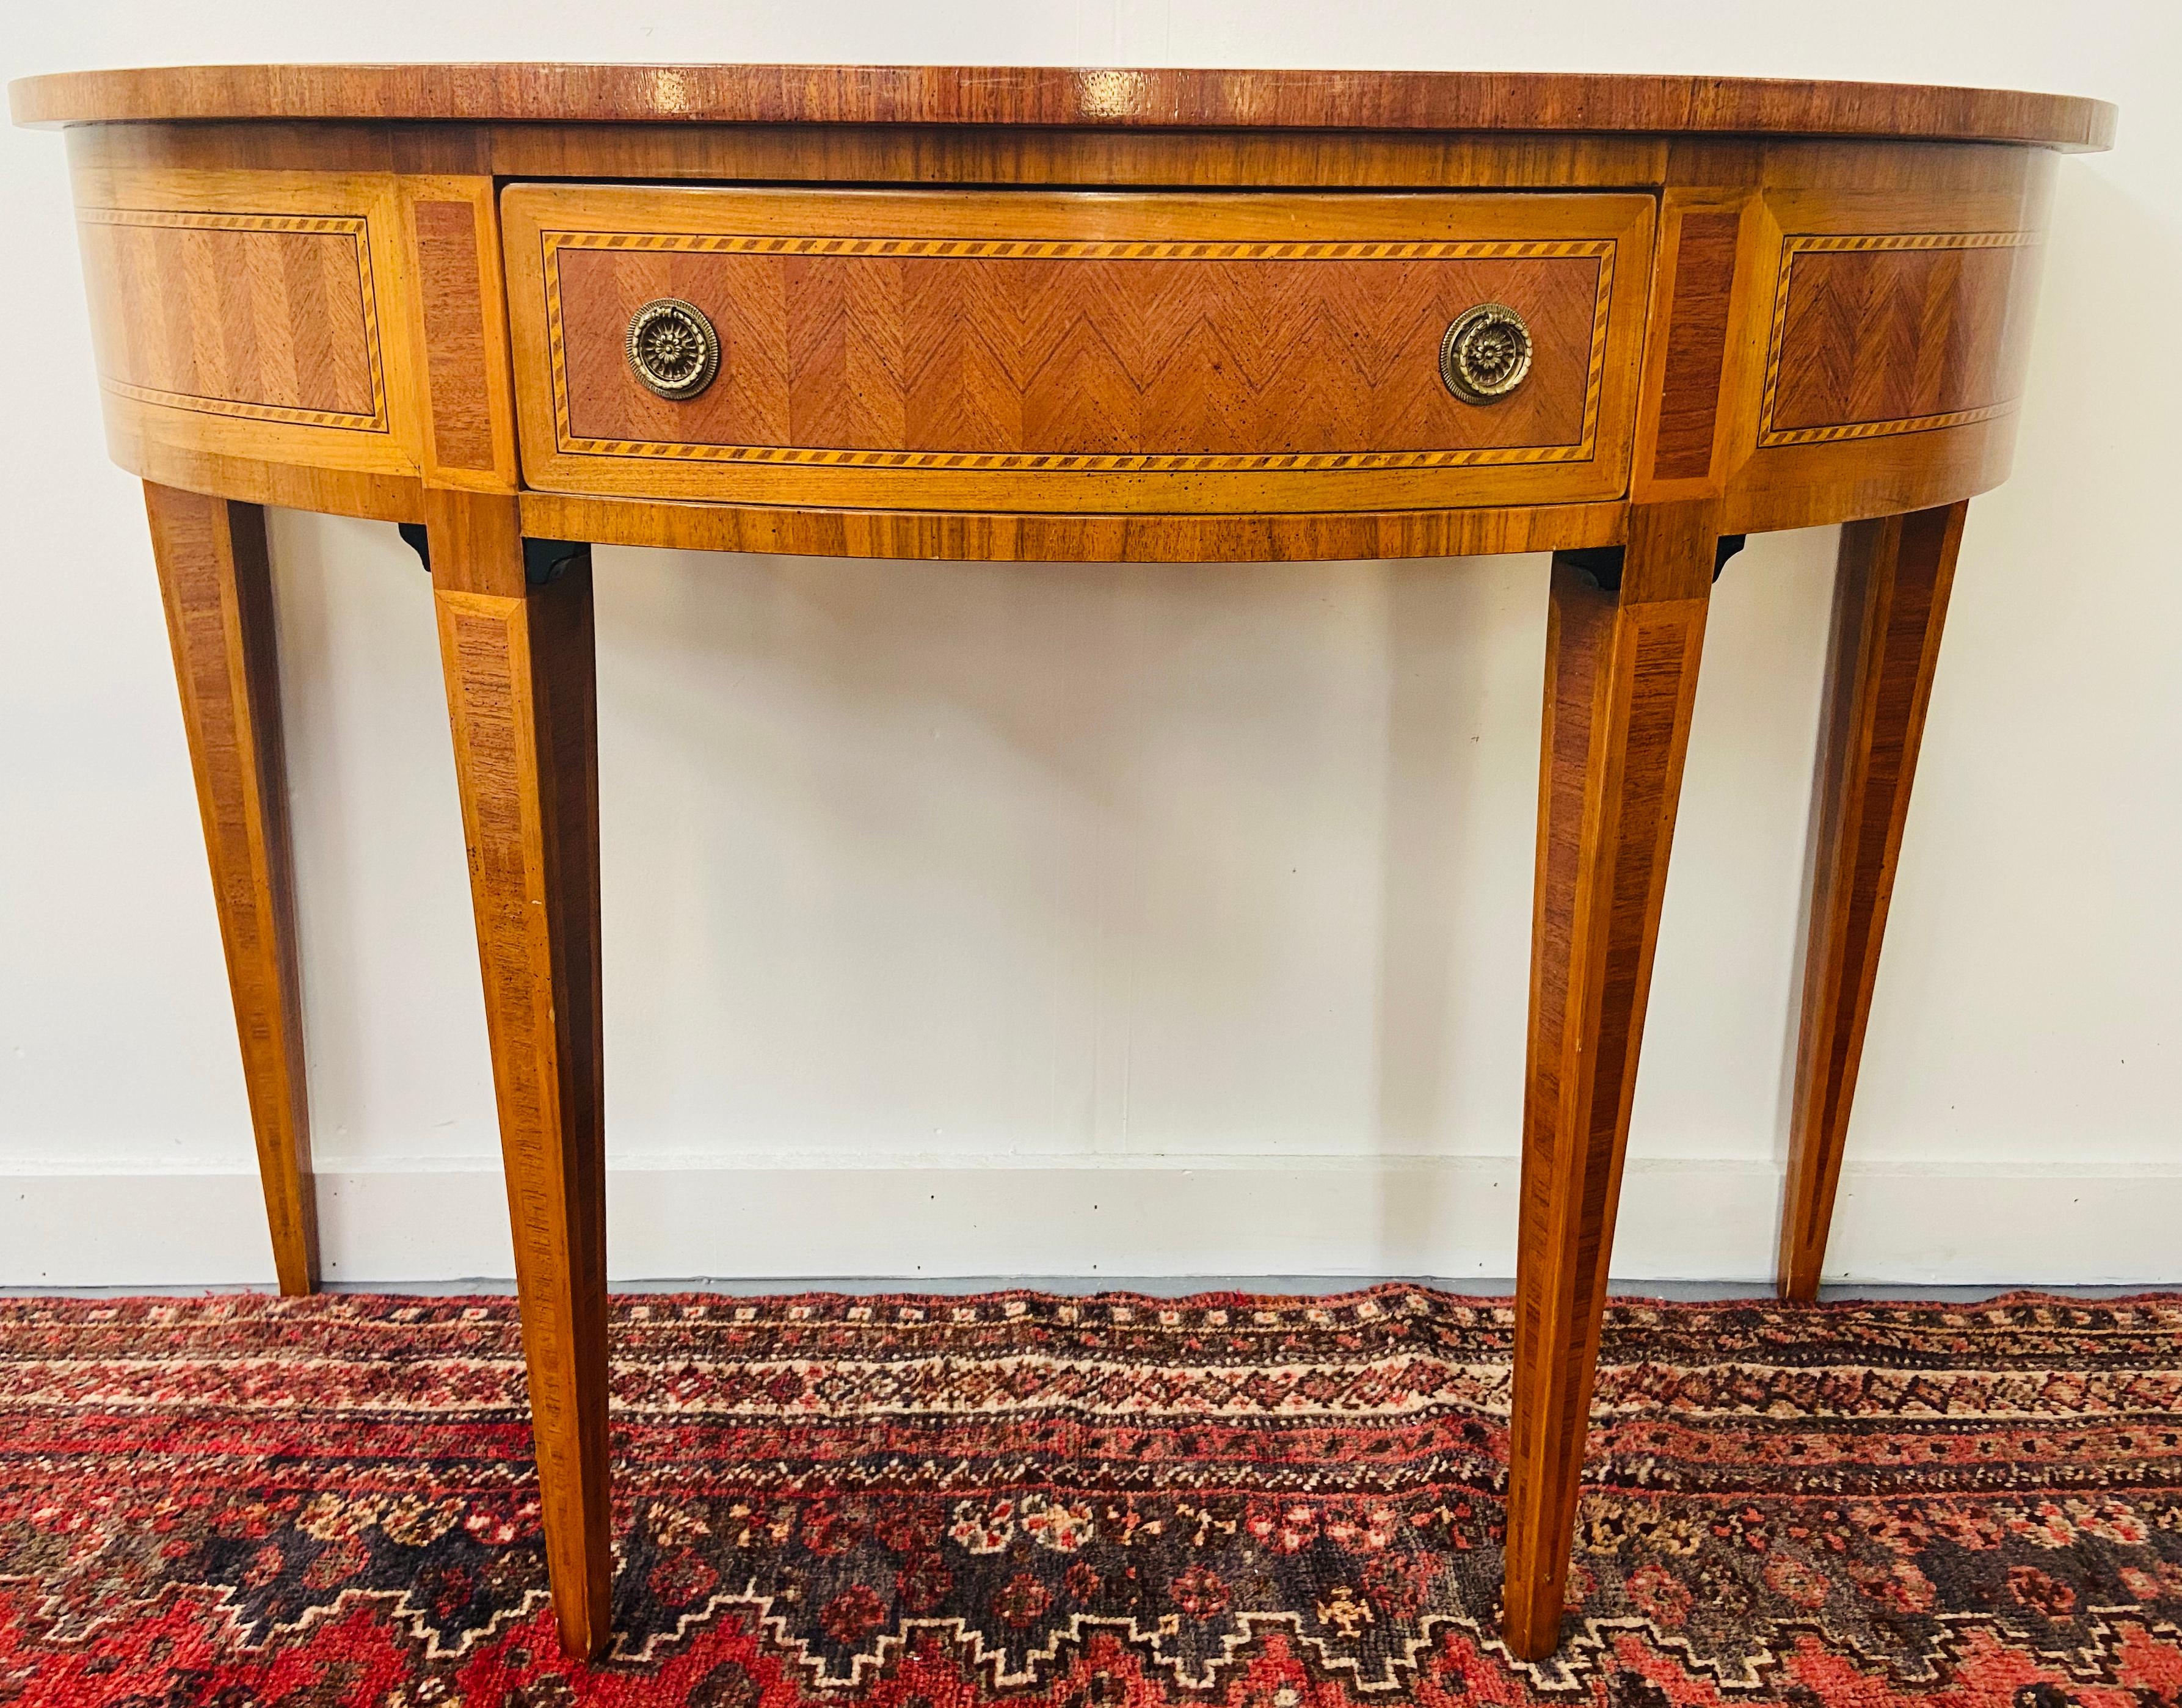 An elegant inlaid satinwood demilune console table with one middle drawer and original brass hardware. The console's timeless design is attributed to Maitland Smith. 
Some fading to the top of the table as shown on the pictures. 

Dimensions: